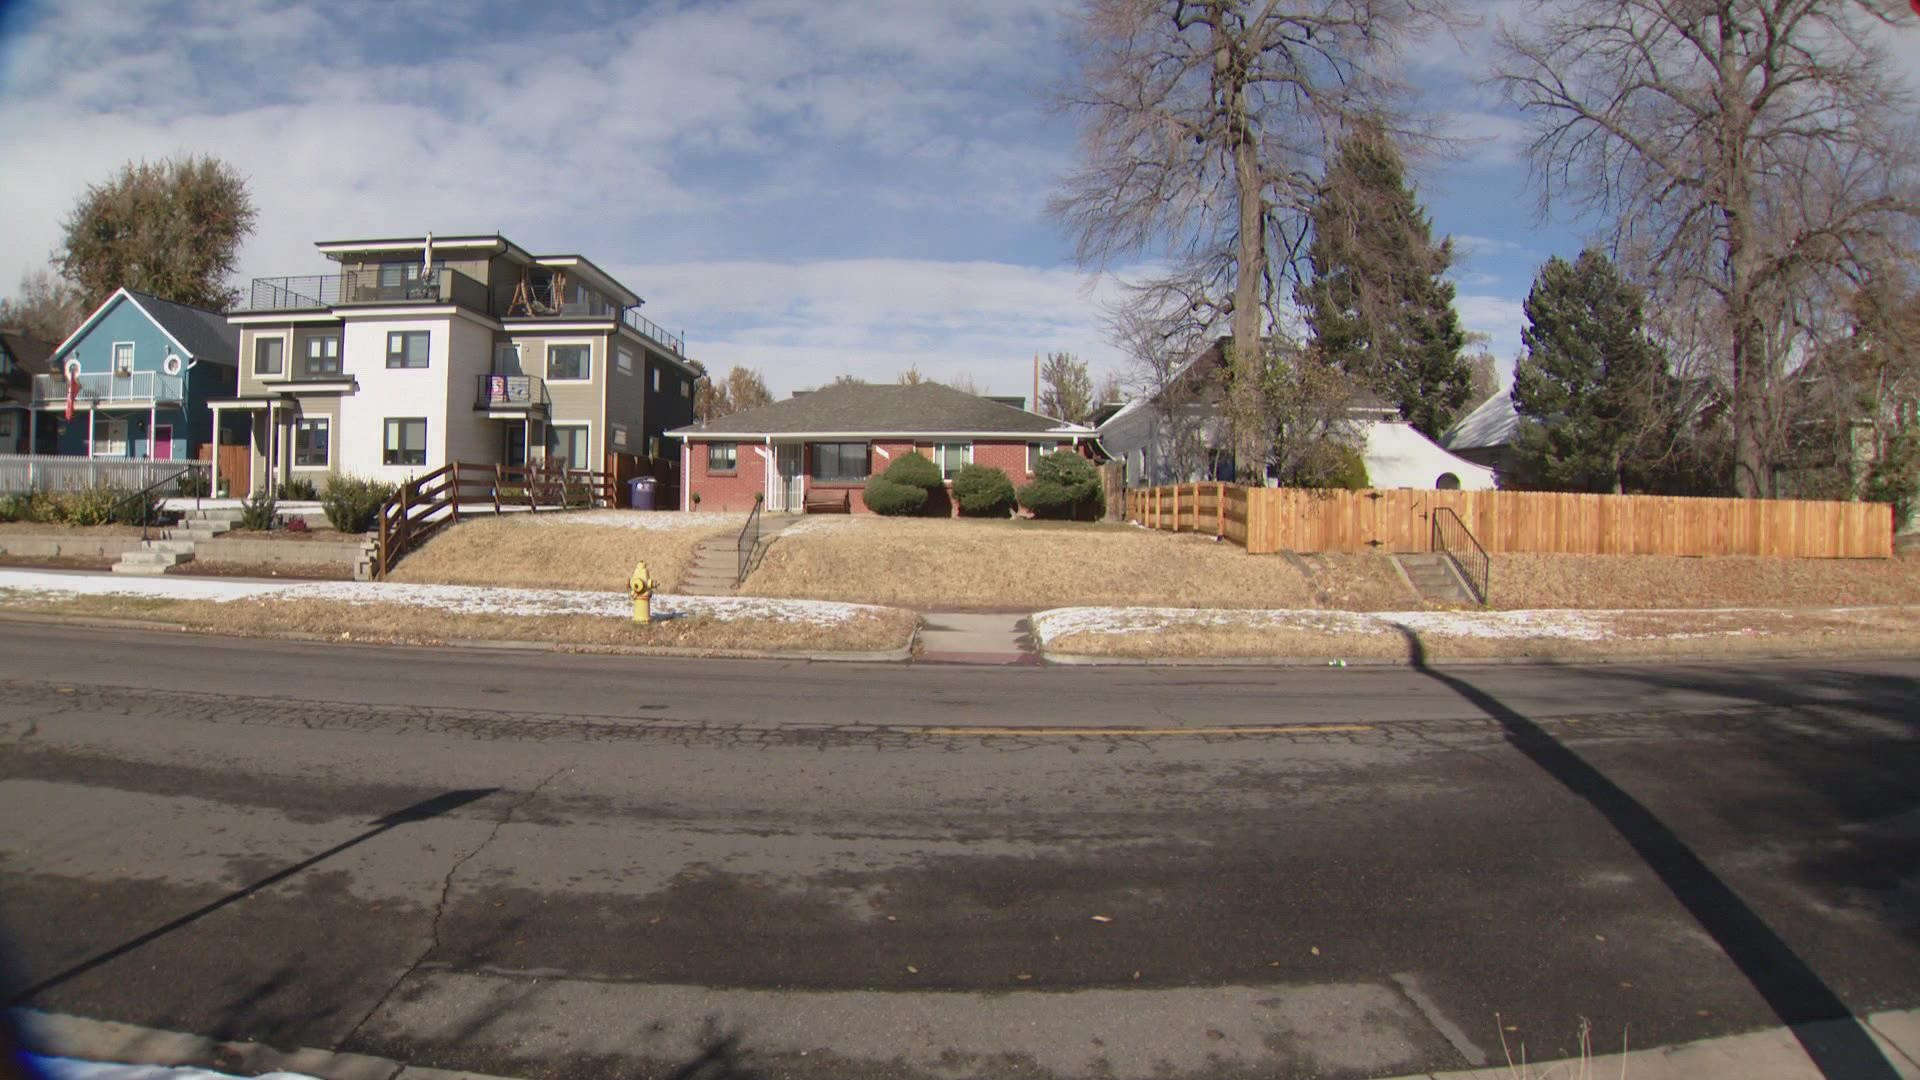 Denver Police said two boys were also taken into custody on assault charges.